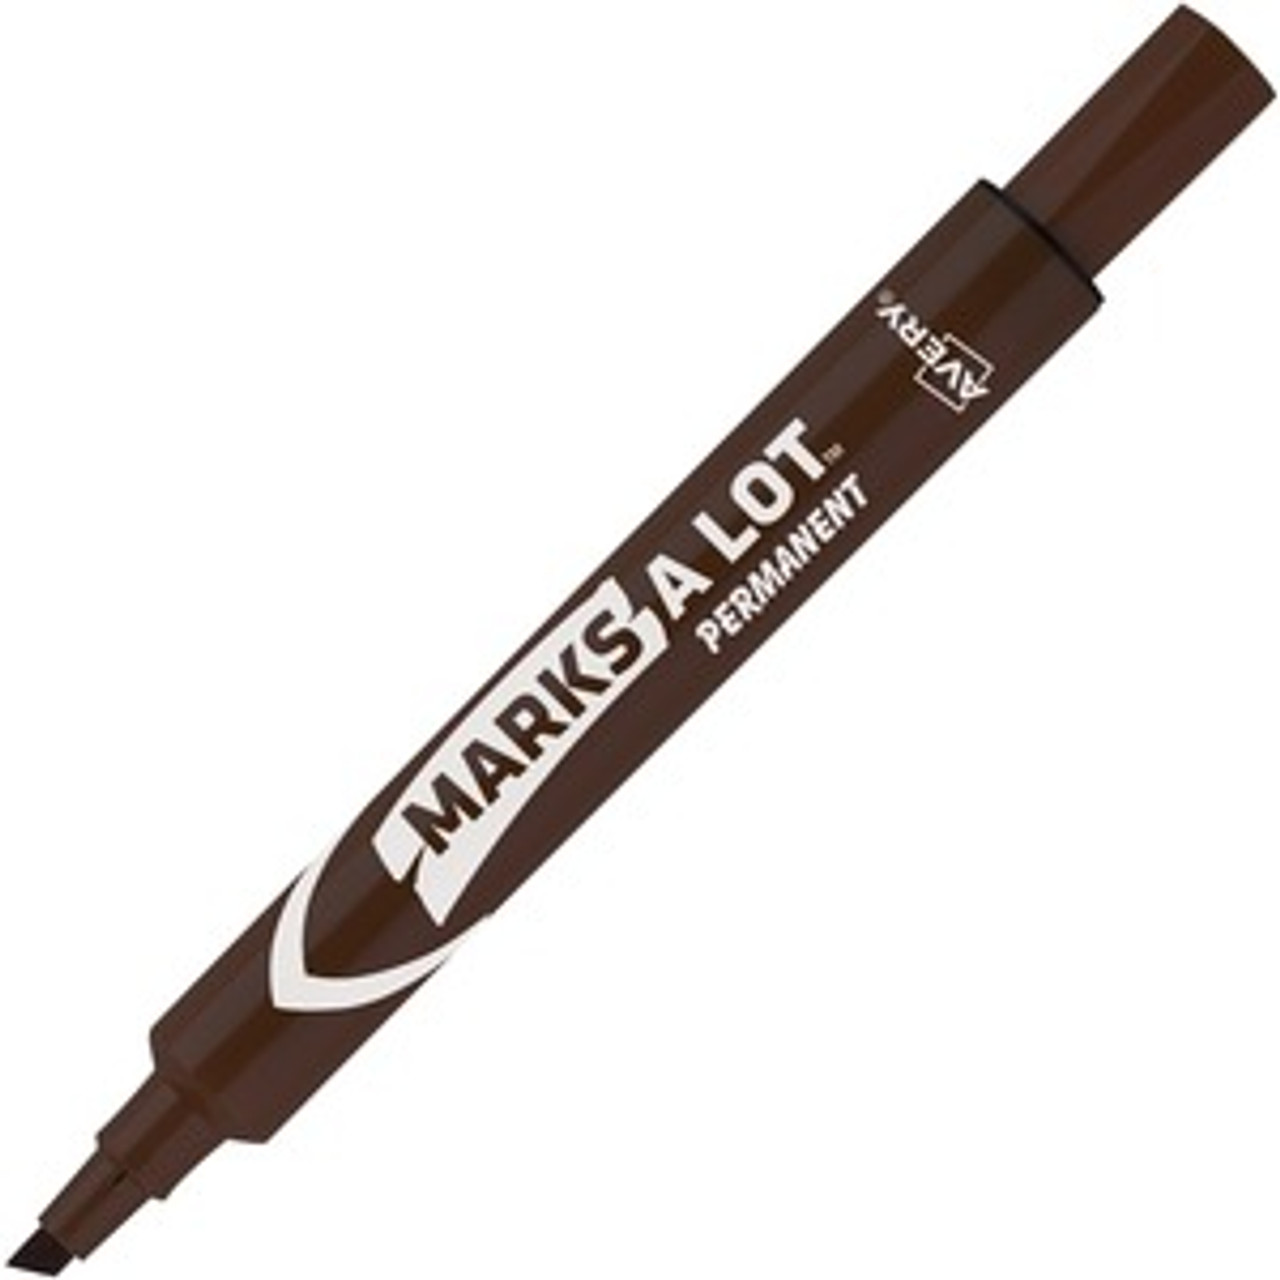 Avery Marks-a-lot Large Permanent Marker - Chisel